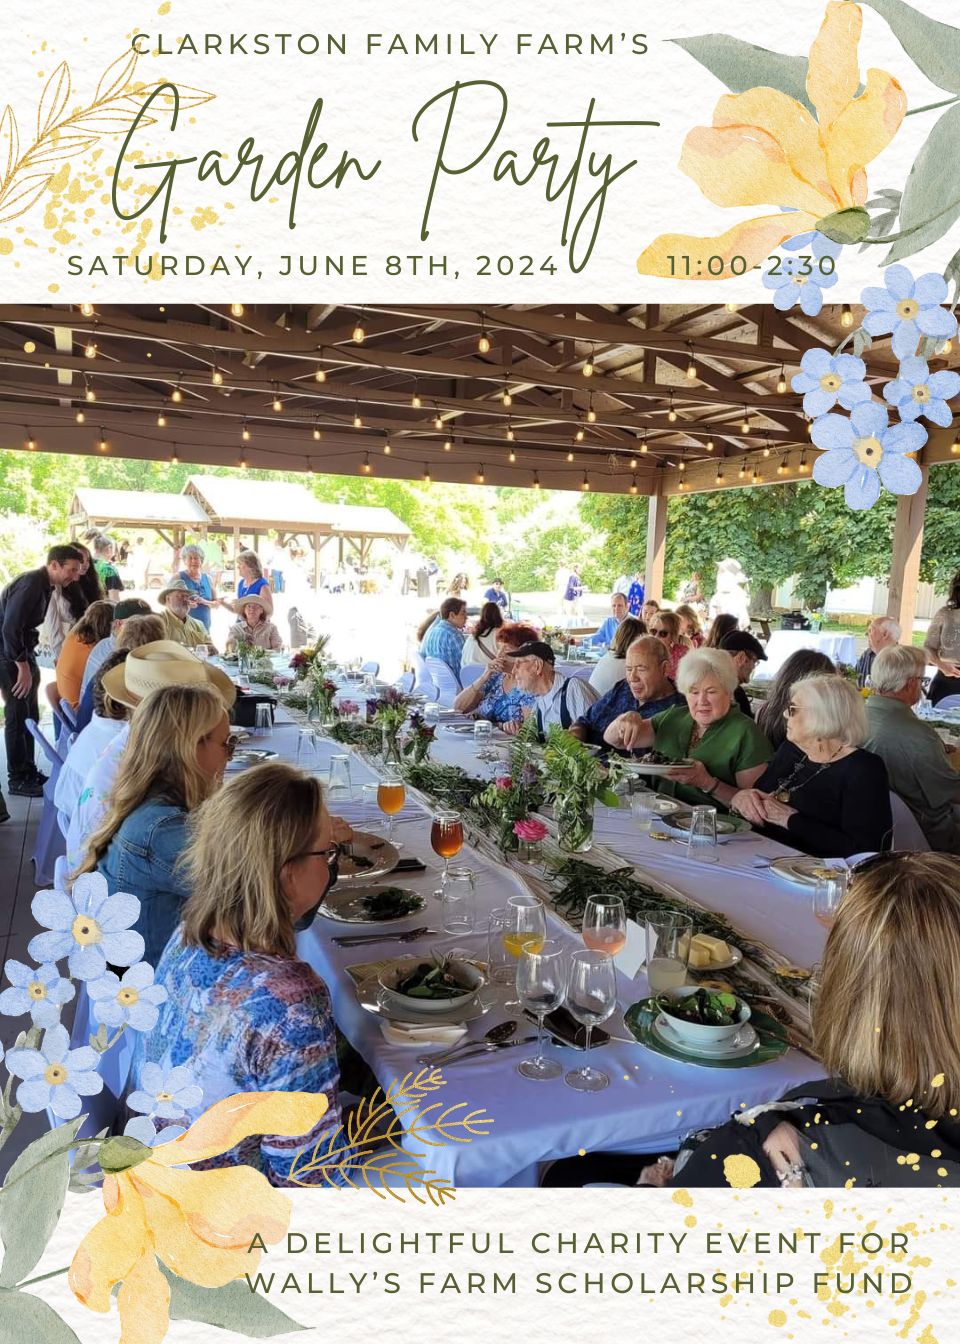 Spring Garden Party Flyer with yellow flowers and green leaf decal surrounding a photo of people in formal attire sitting at a dinner table outside in the pavillion.